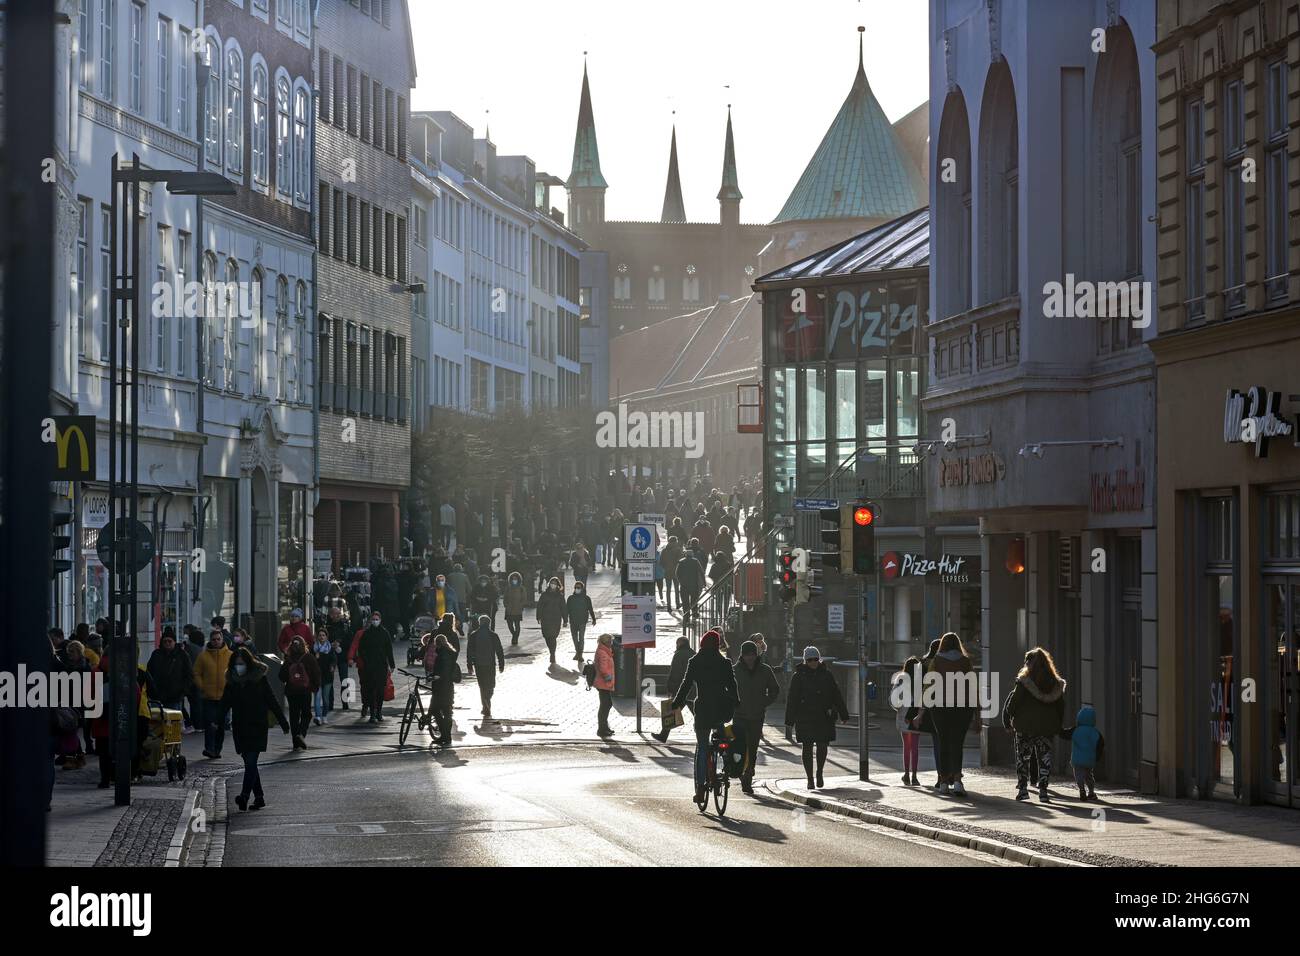 Lubeck, Germany, January 15, 2022: Crowd of people in backlight walking along the shopping street in the city center of the historic old town, selecte Stock Photo